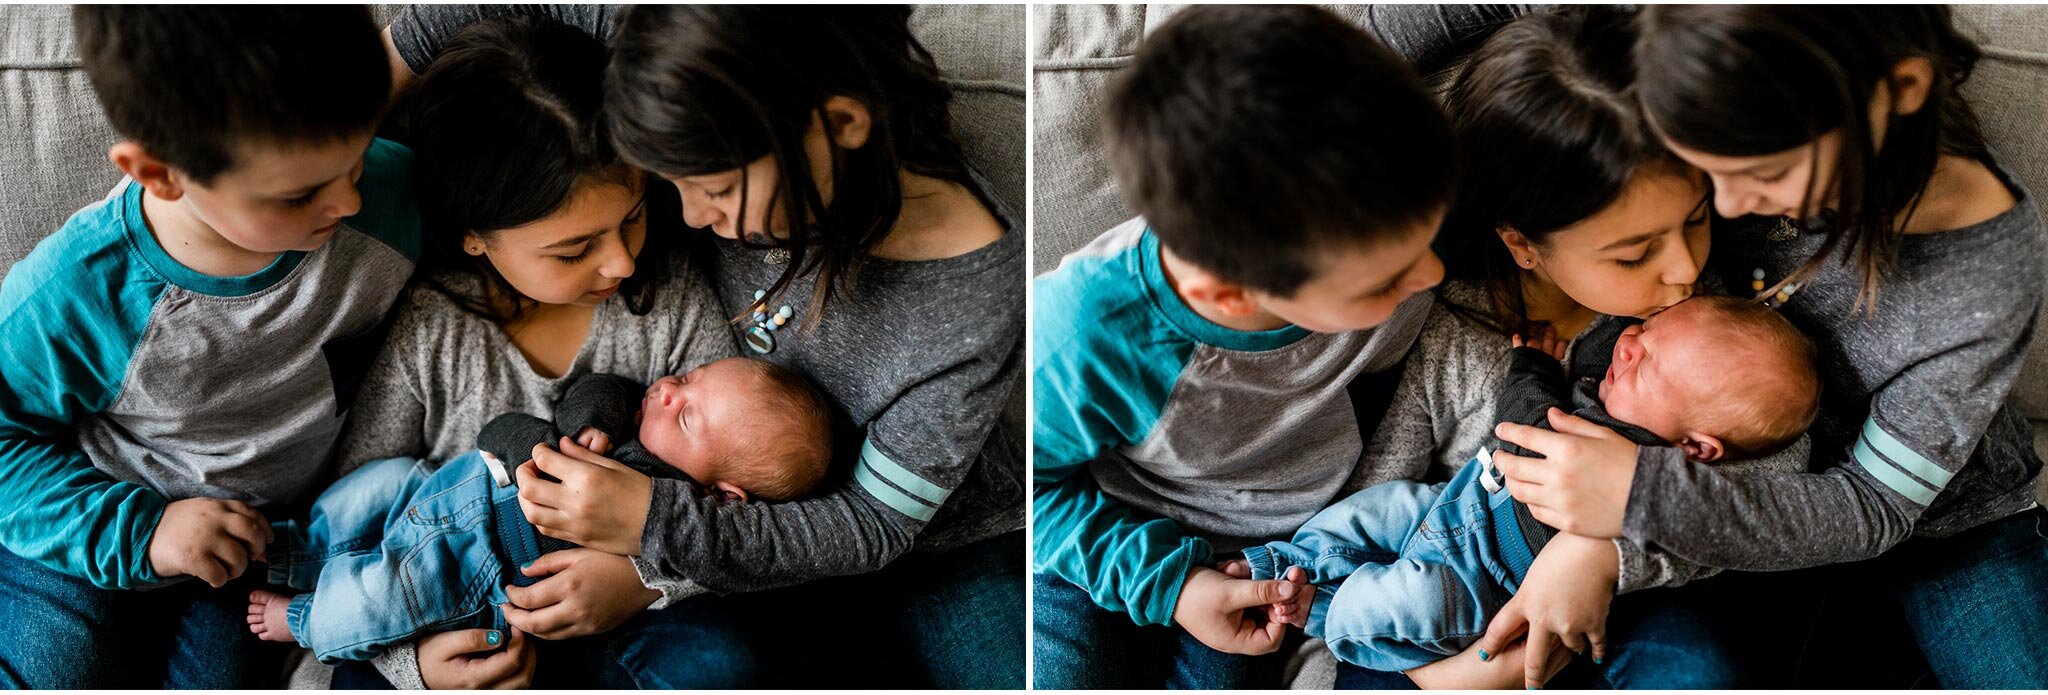 Raleigh Lifestyle Session at Home | Raleigh Newborn Photographer | By G. Lin Photography | Siblings holding baby on couch